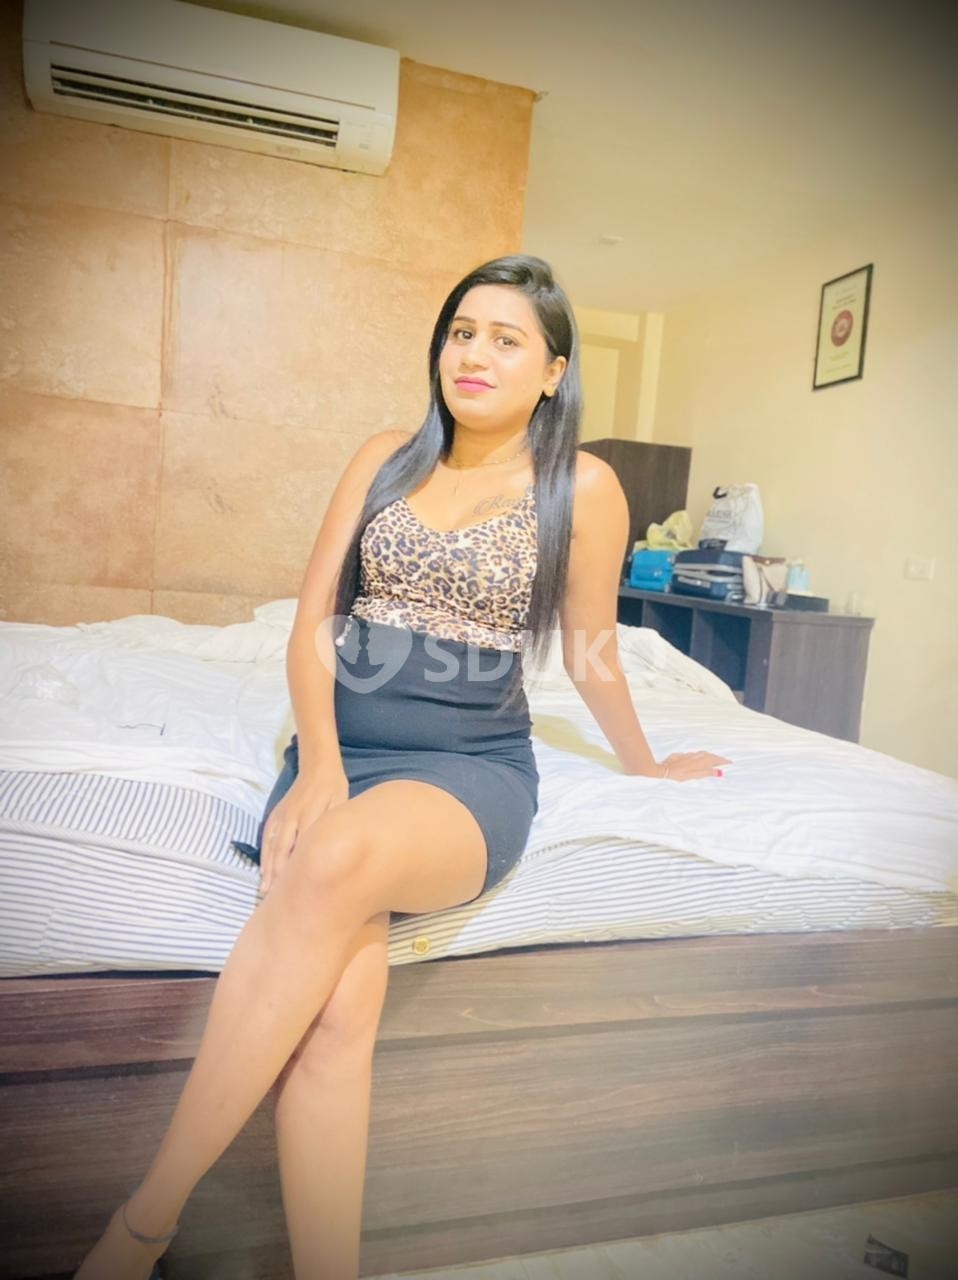 PRABHADEVI(MUMBAI)📞BEST HIGH PROFILE CALL GIRL FOR SEX AND SATISFACTION CALL ME NOW 📞